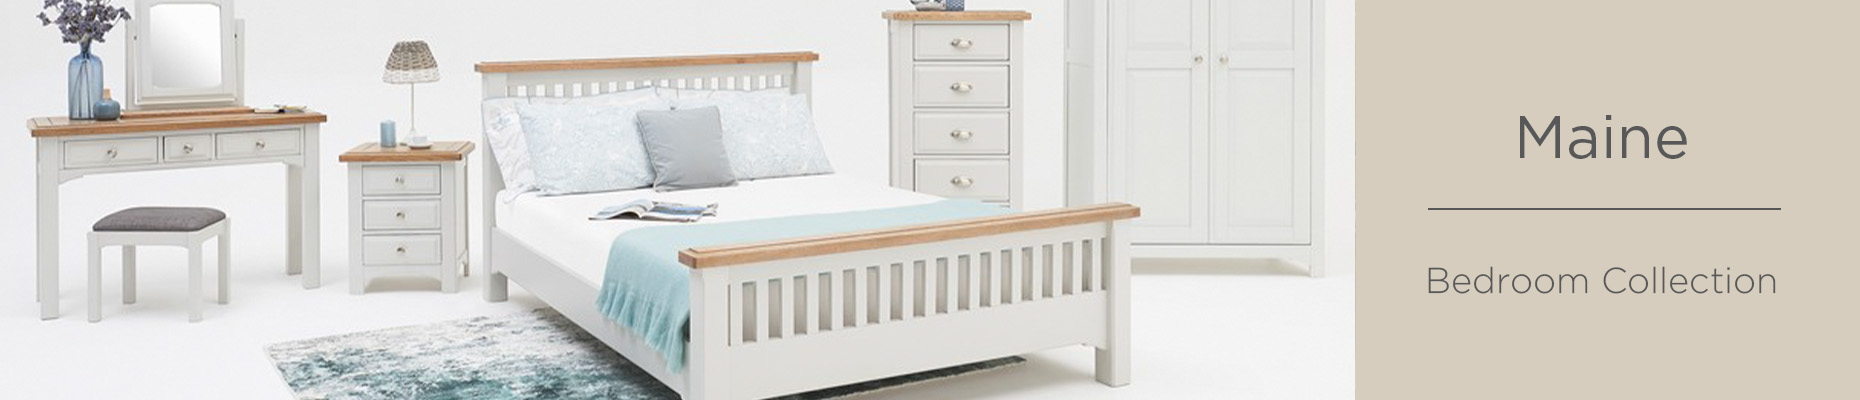 Maine bedroom collection at Forrest Furnishing